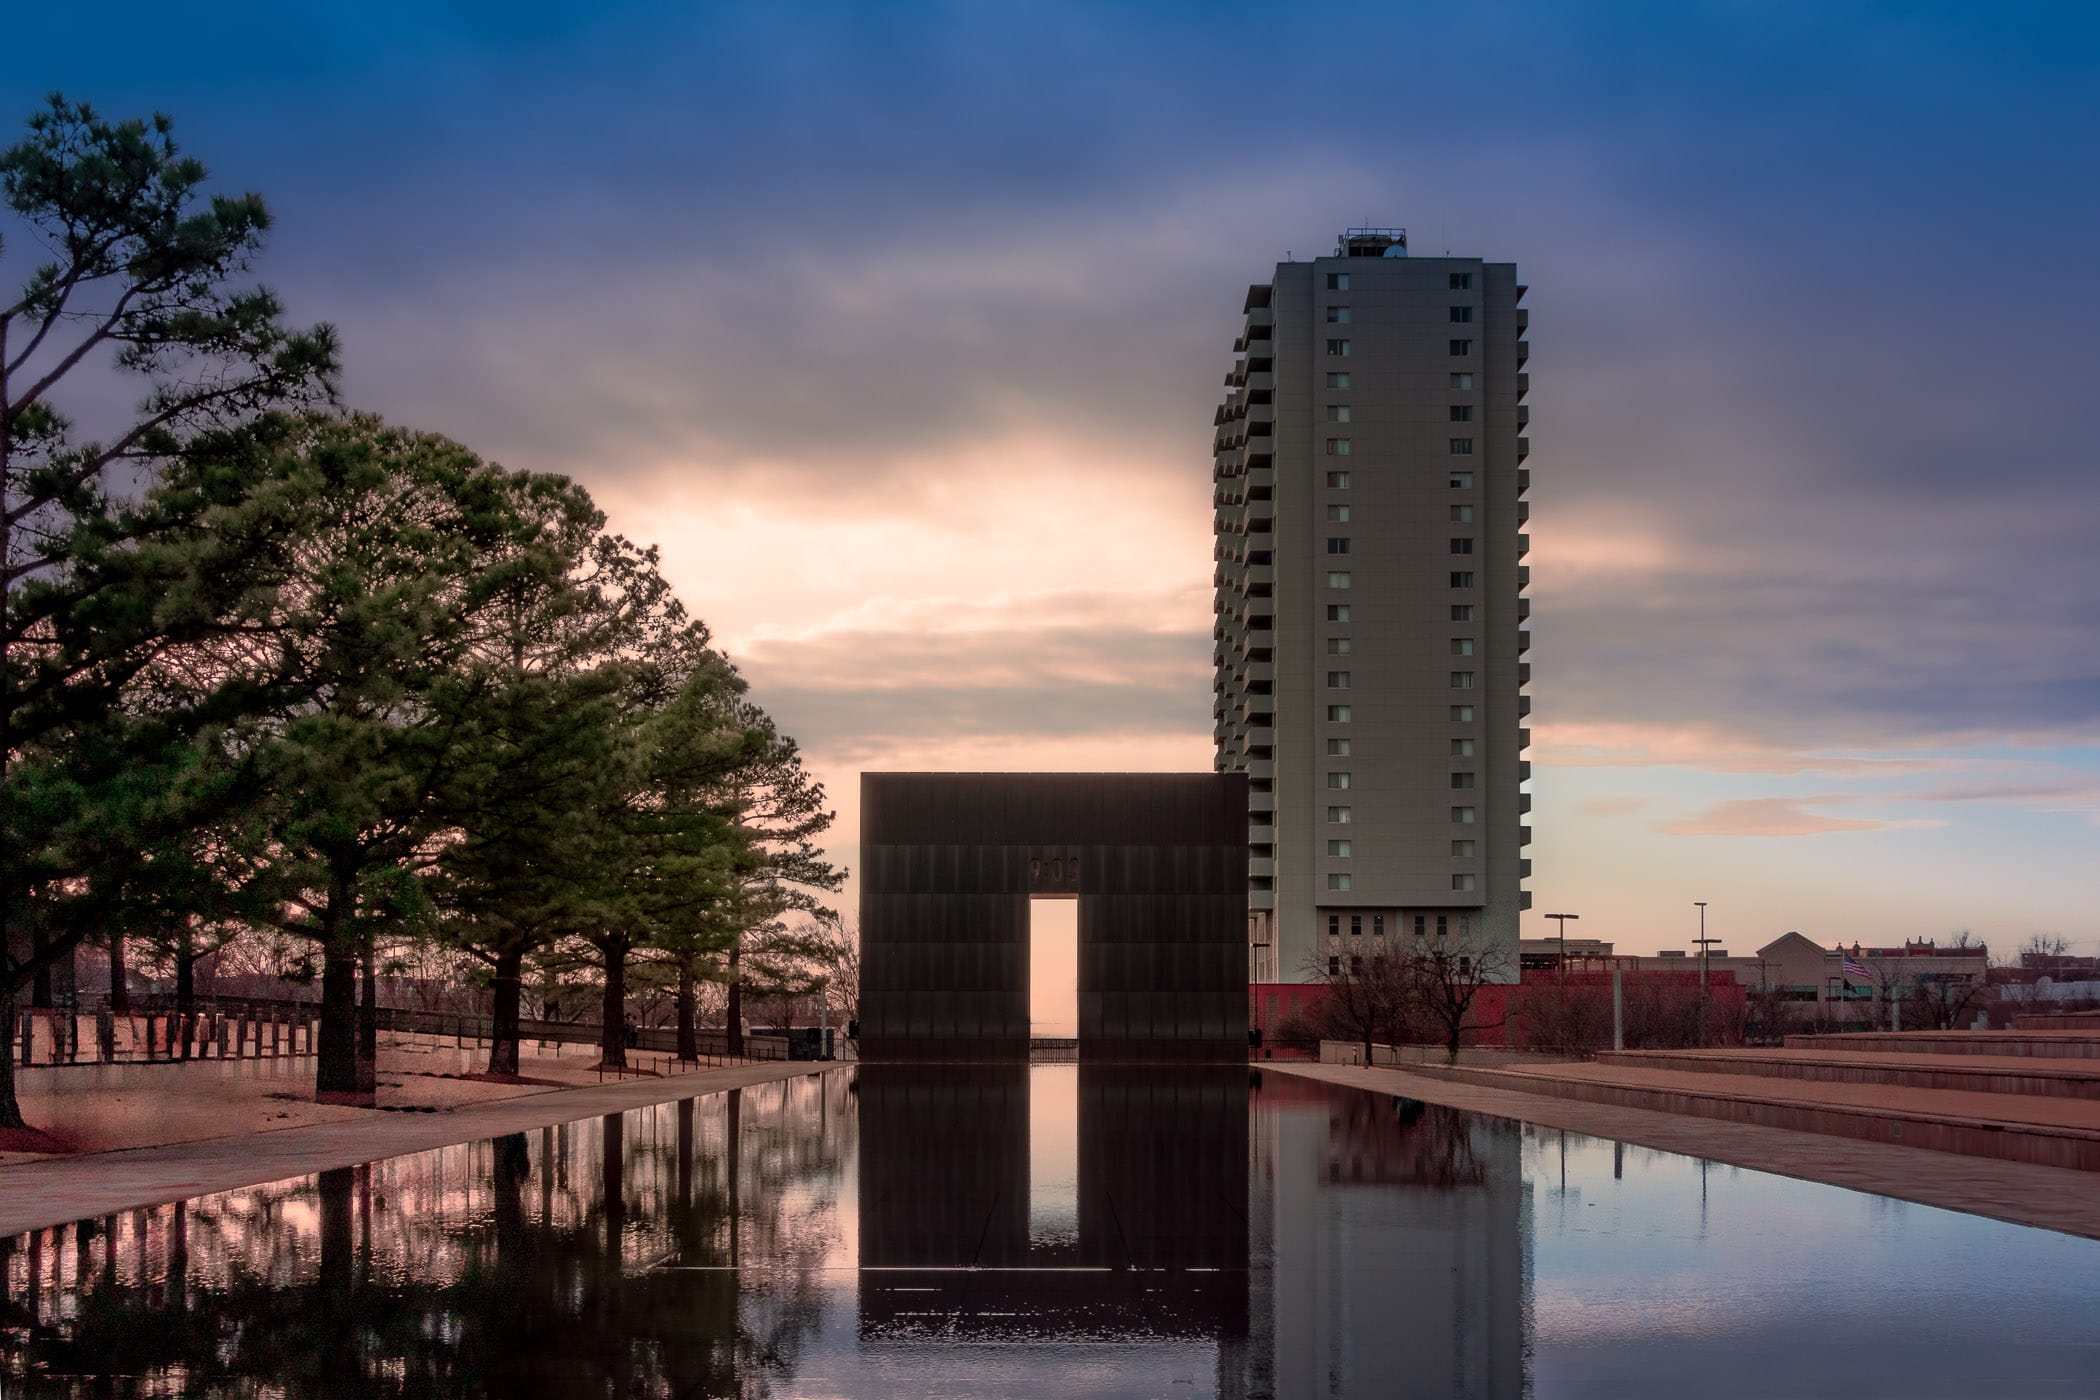 Evening on the Oklahoma City National Memorial in Downtown Oklahoma City.